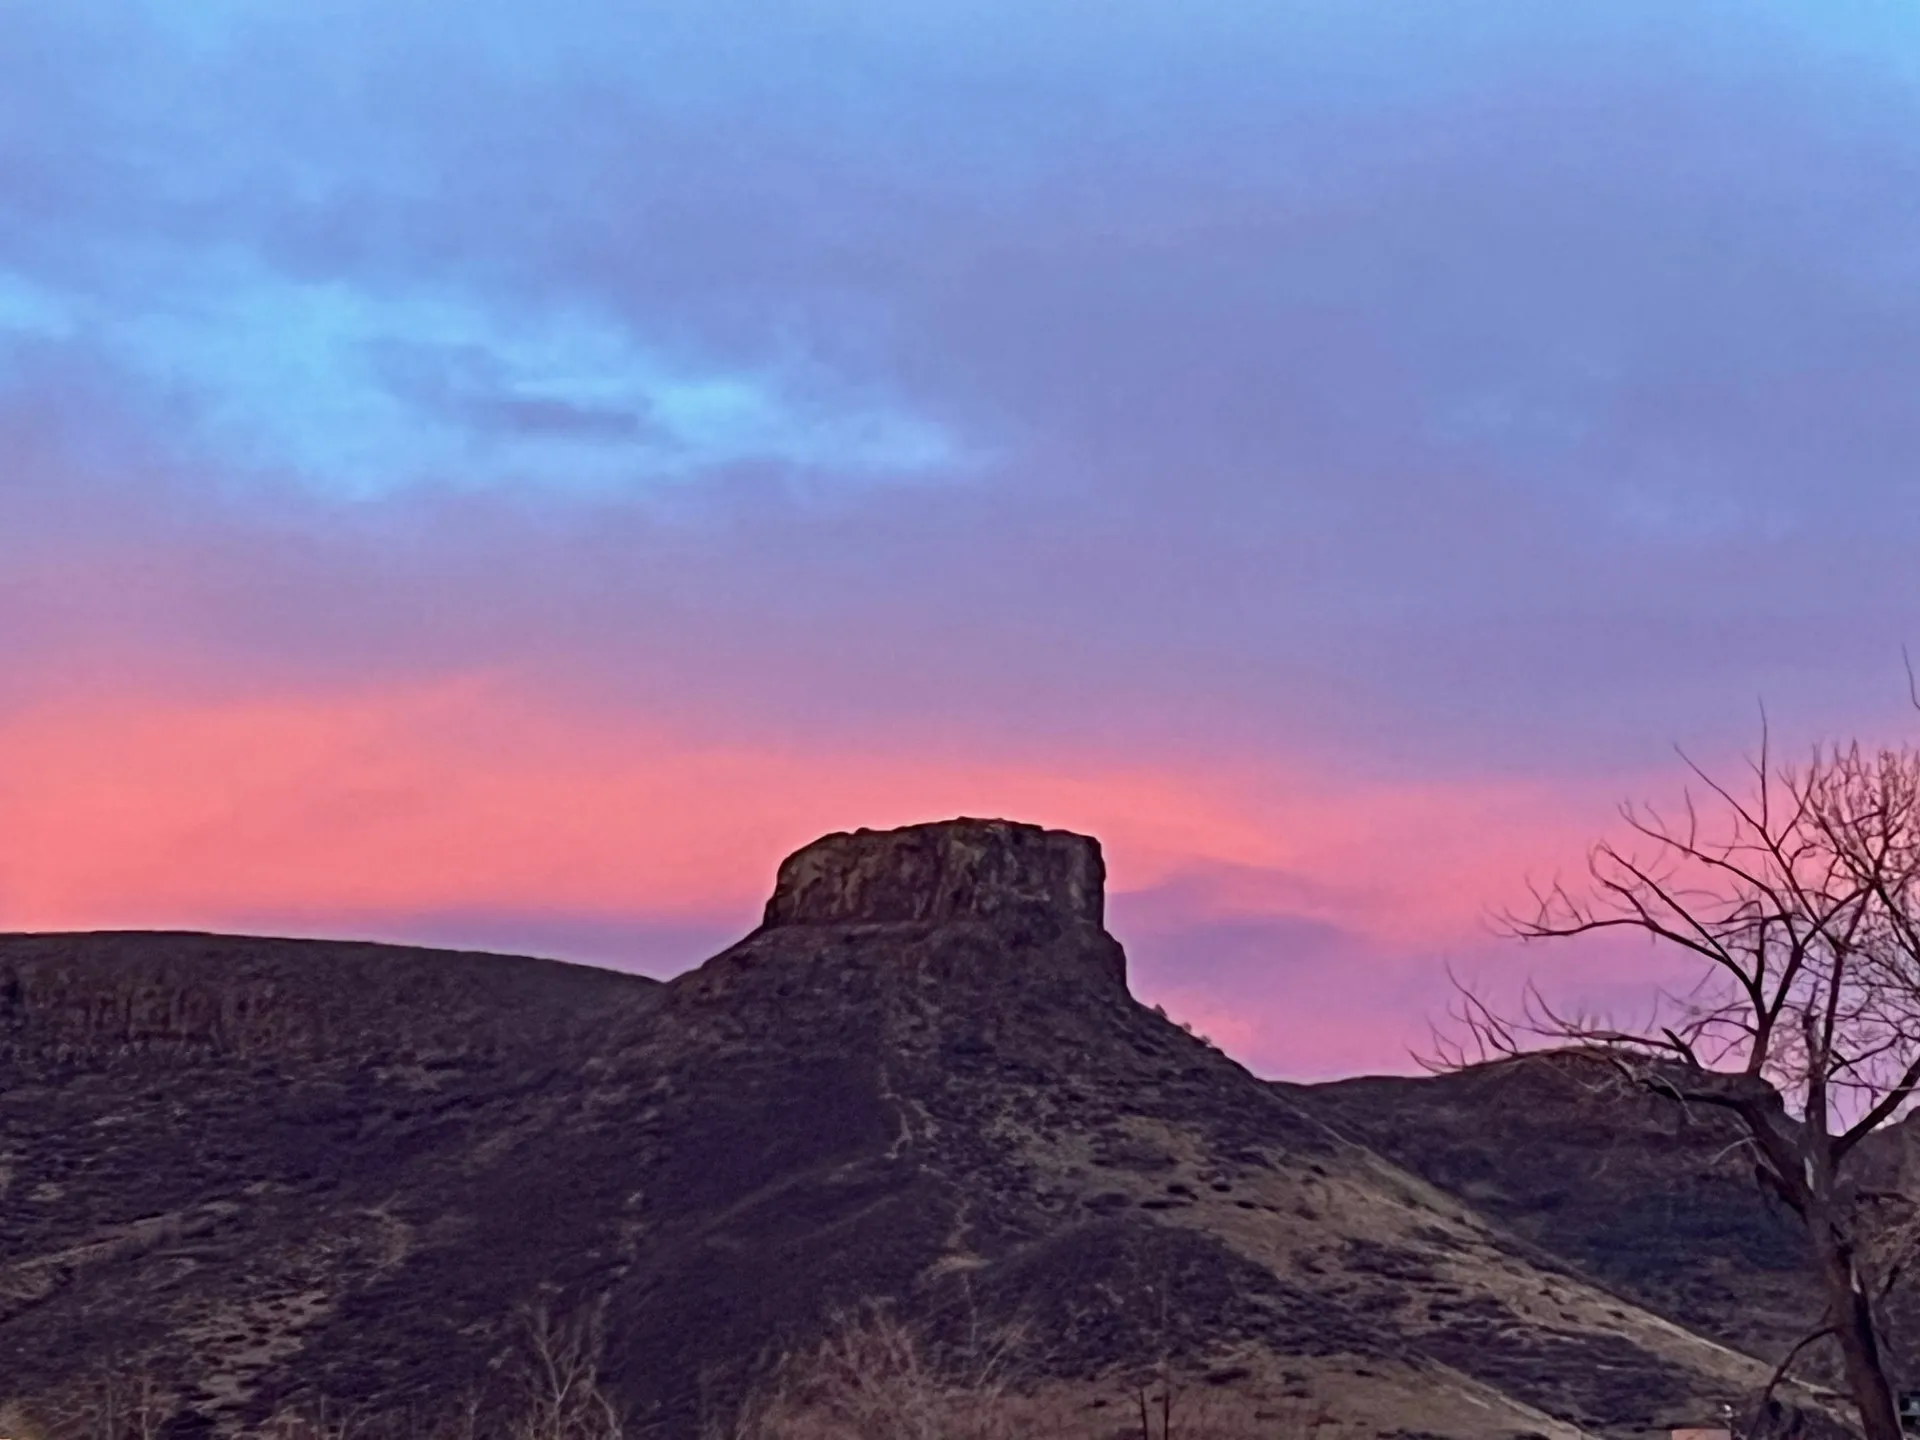 Castle Rock with a bright pink early morning sky in the background.